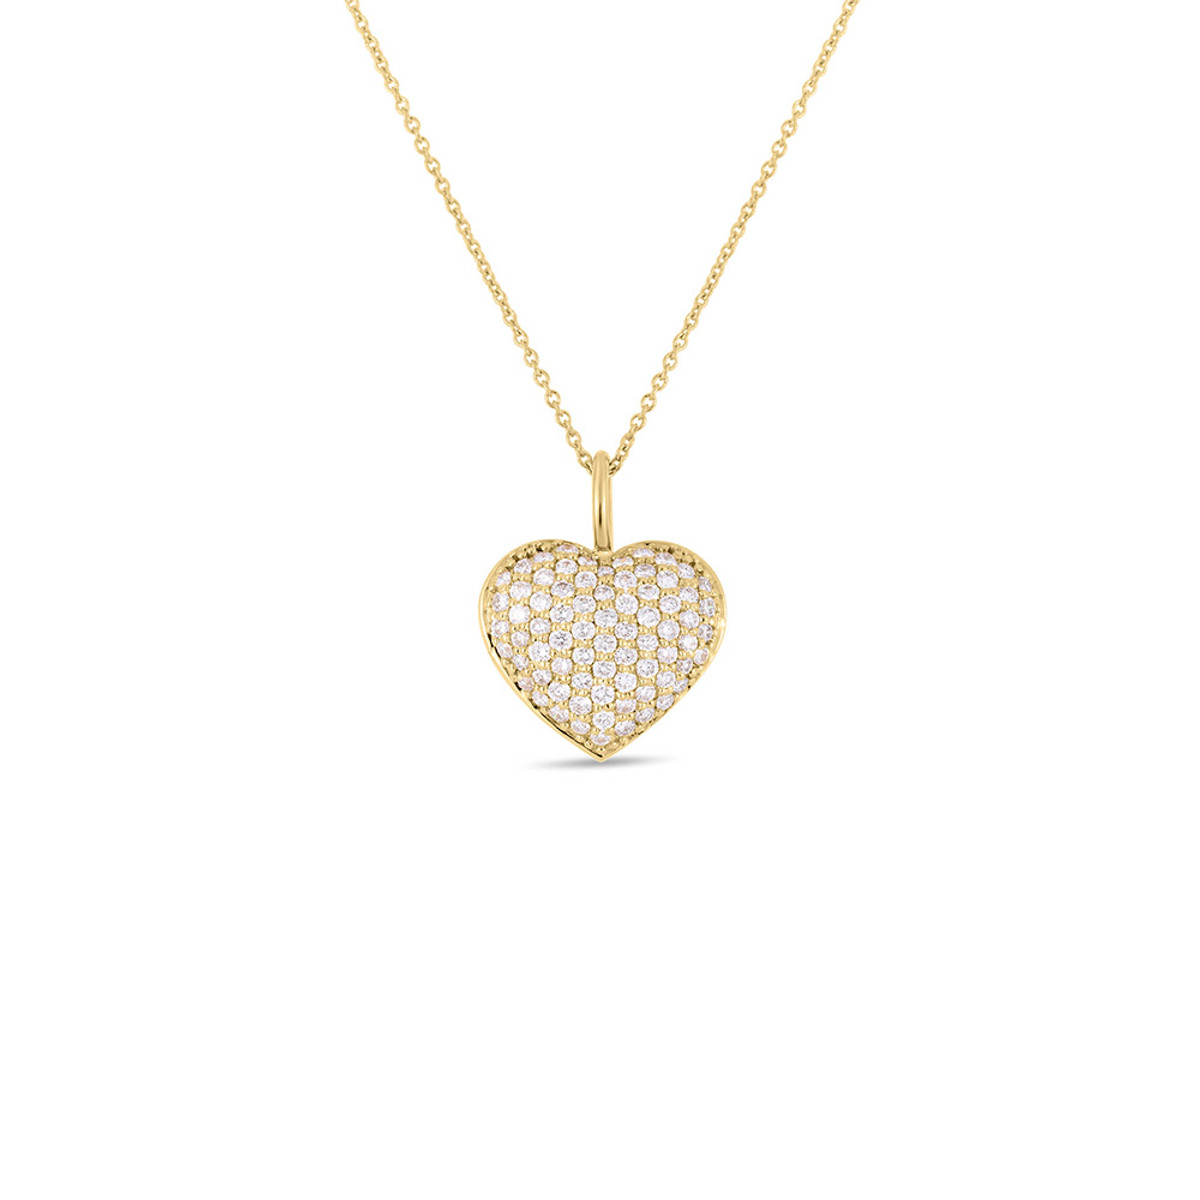 Roberto Coin 18K Yellow Gold Diamond Heart Necklace-44402 Product Image